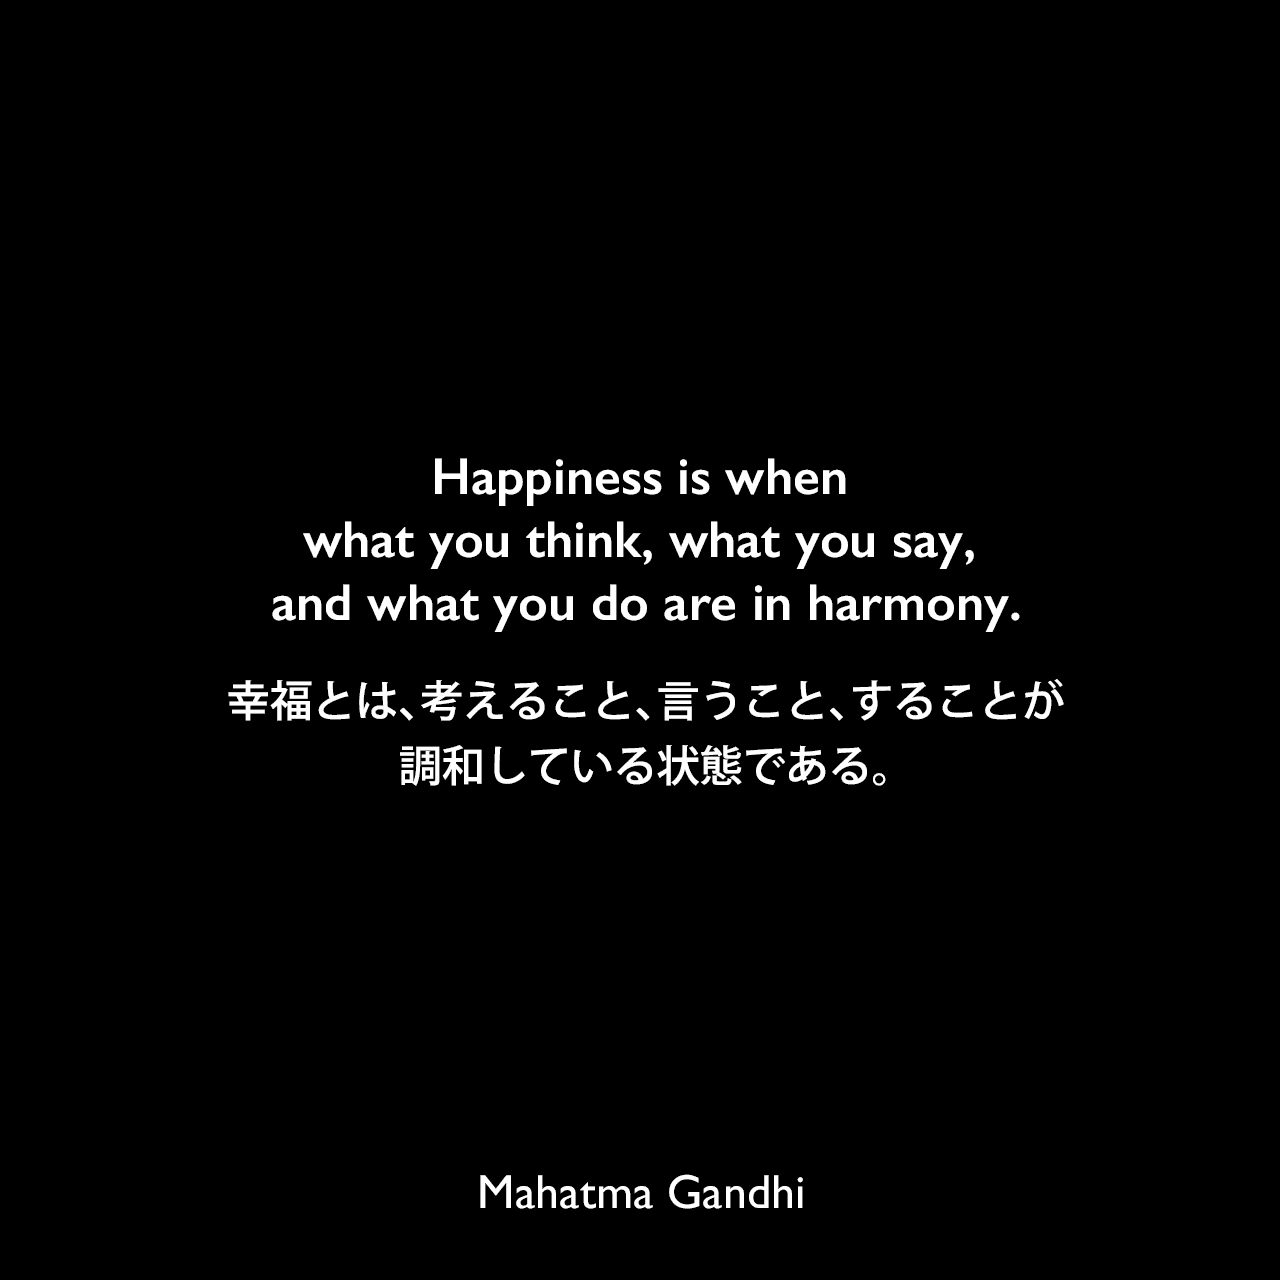 Happiness is when what you think, what you say, and what you do are in harmony.幸福とは、考えること、言うこと、することが調和している状態である。Mahatma Gandhi